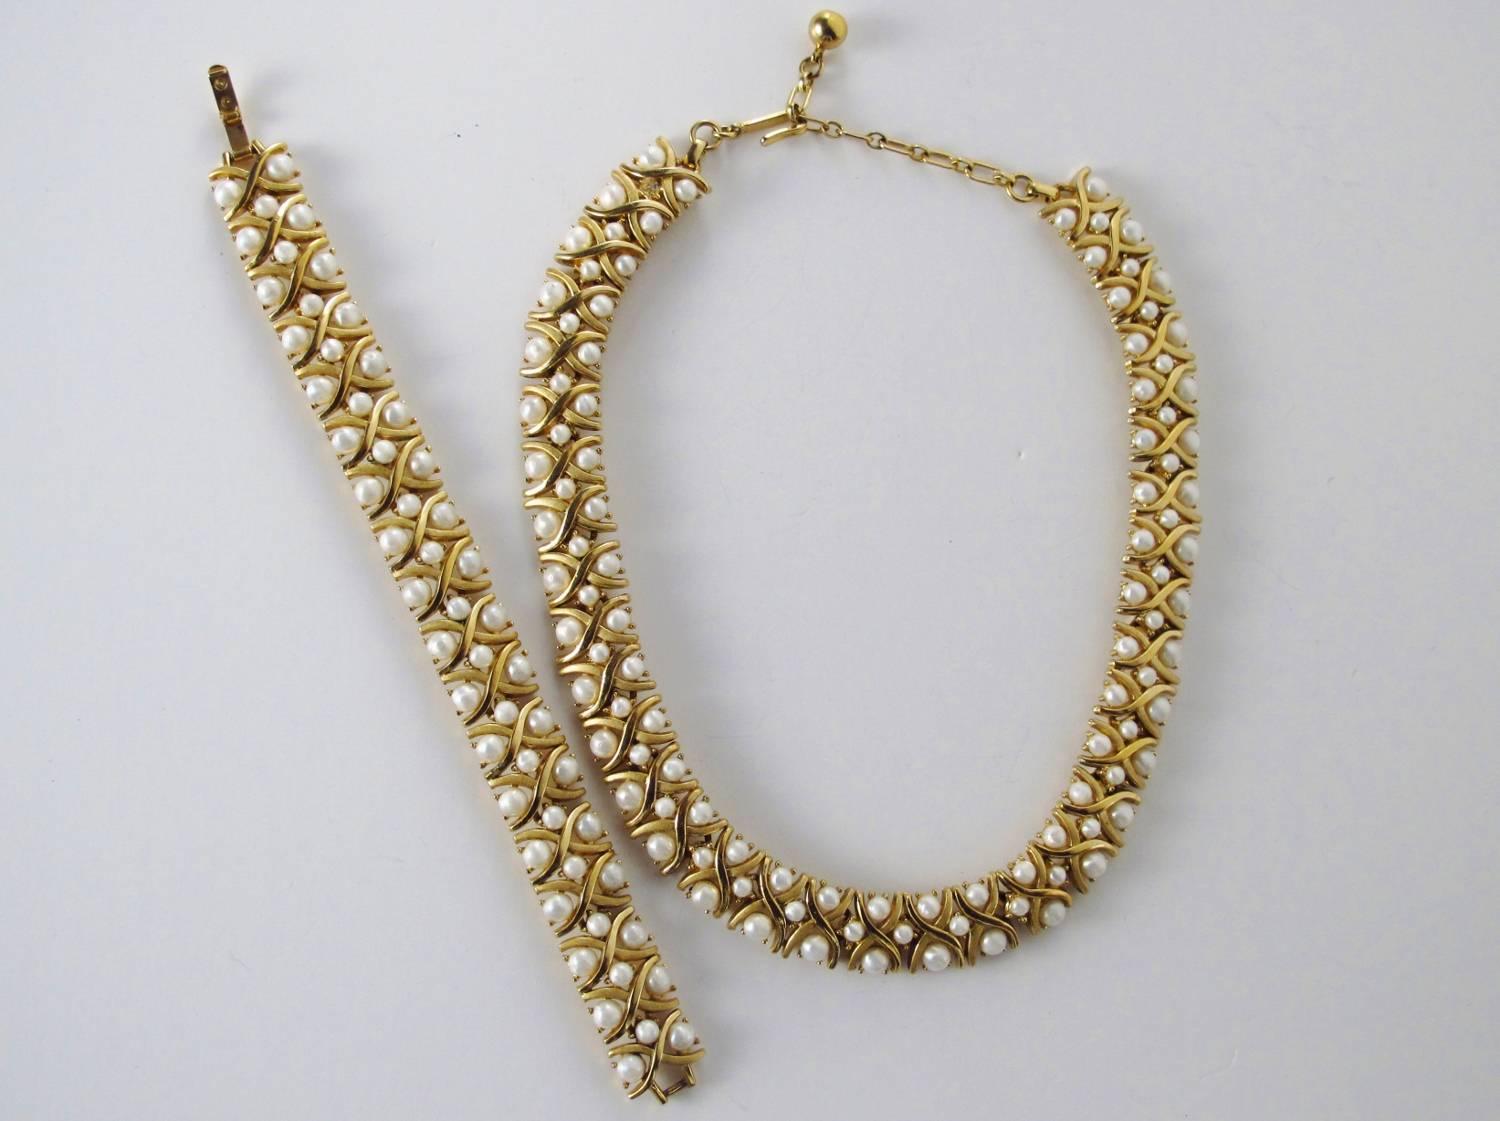 Trifari vintage pearl on gold tone necklace and bracelet, circa 1950s, USA. Vintage faux pearls set in gold tone. 15